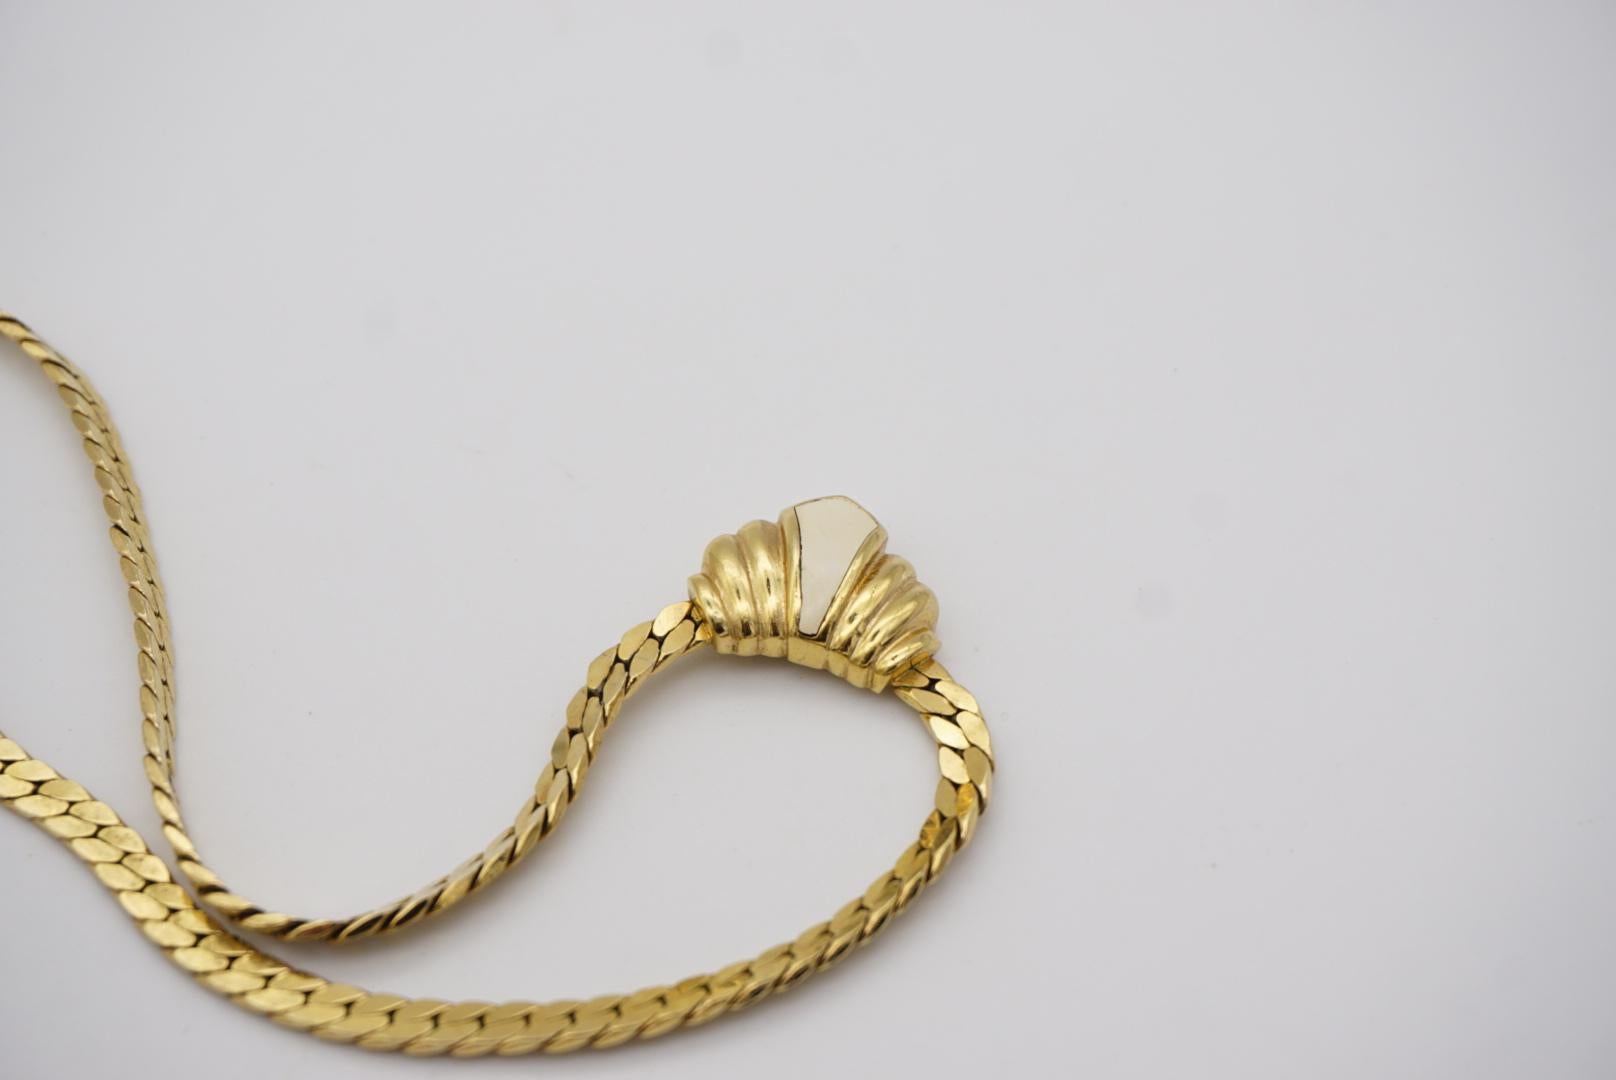 Christian Dior Vintage 1980s Triangle Swirl Cream Enamel Gold Pendant Necklace  For Sale 1